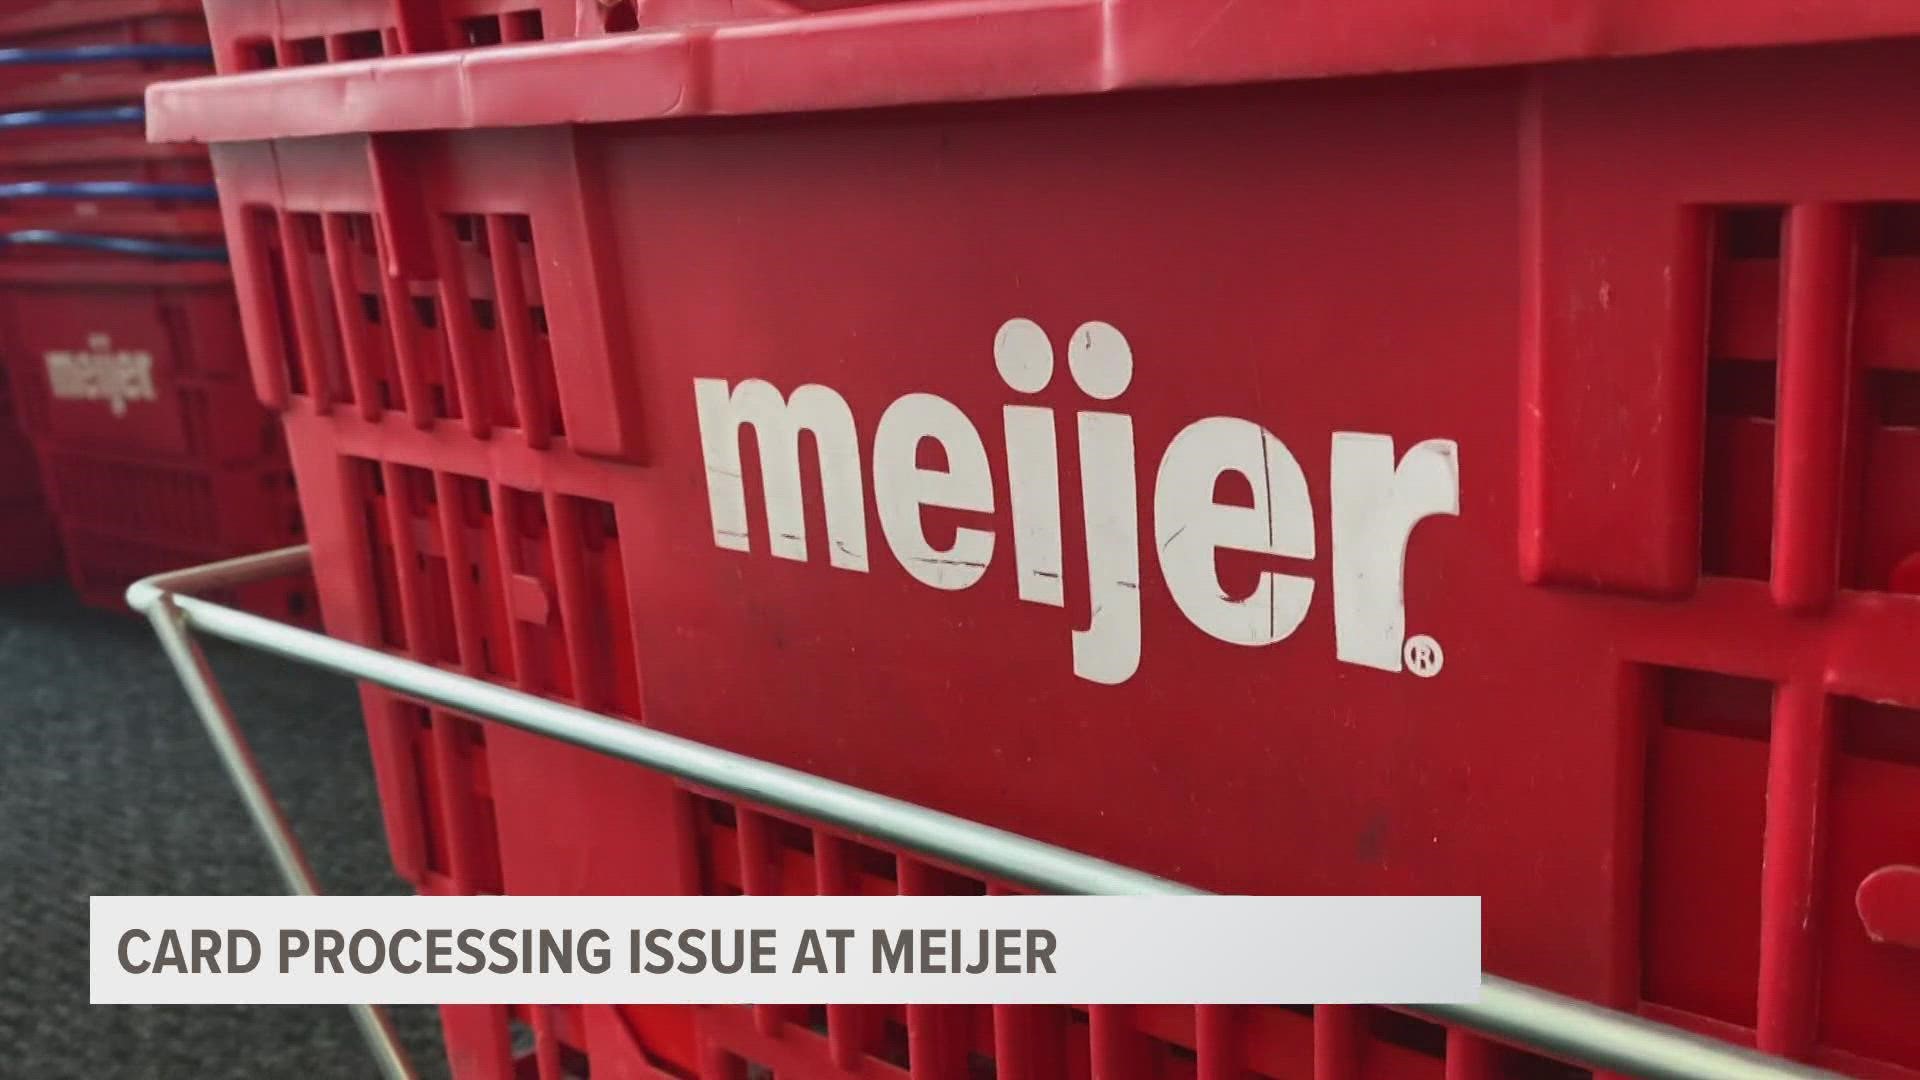 Customers who shopped at Meijer Tuesday may have run into issues using their debit cards due to a system processing issue affecting multiple retailers.